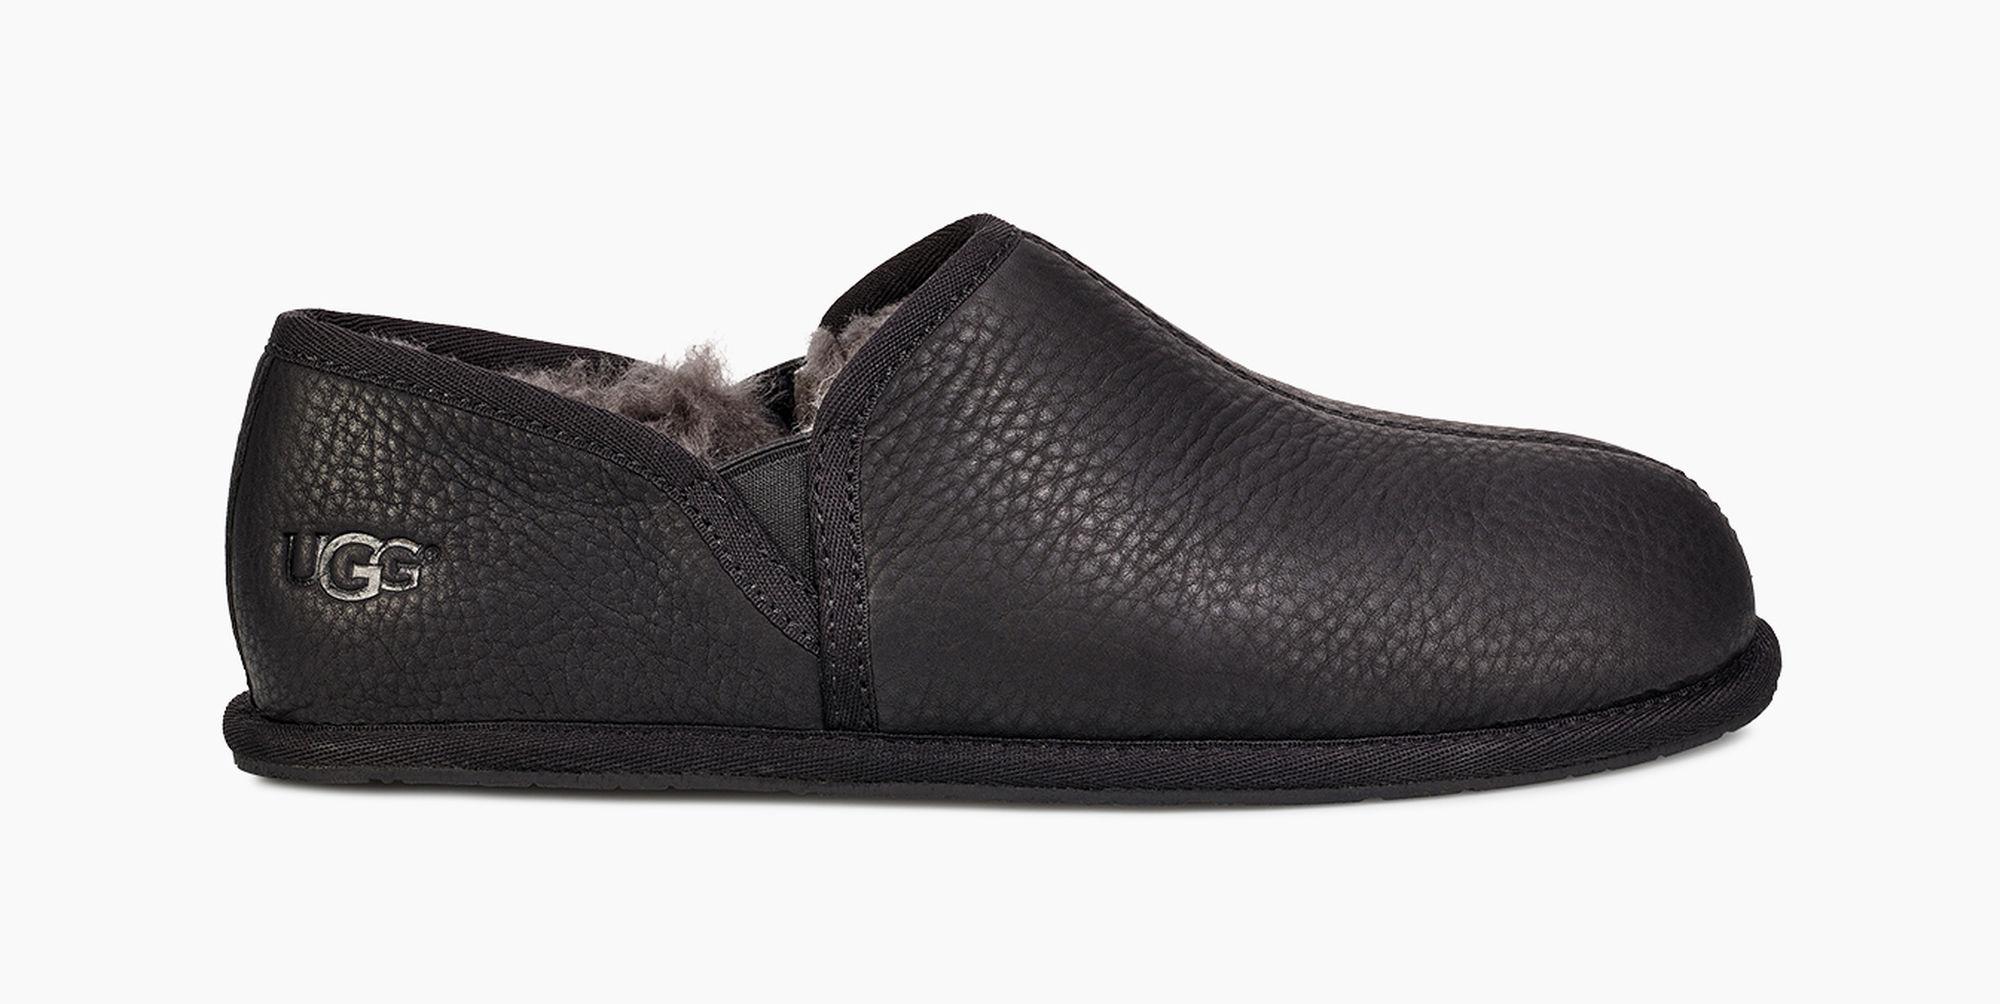 UGG Scuff Romeo Ii Leather Slippers Black for Men - Lyst